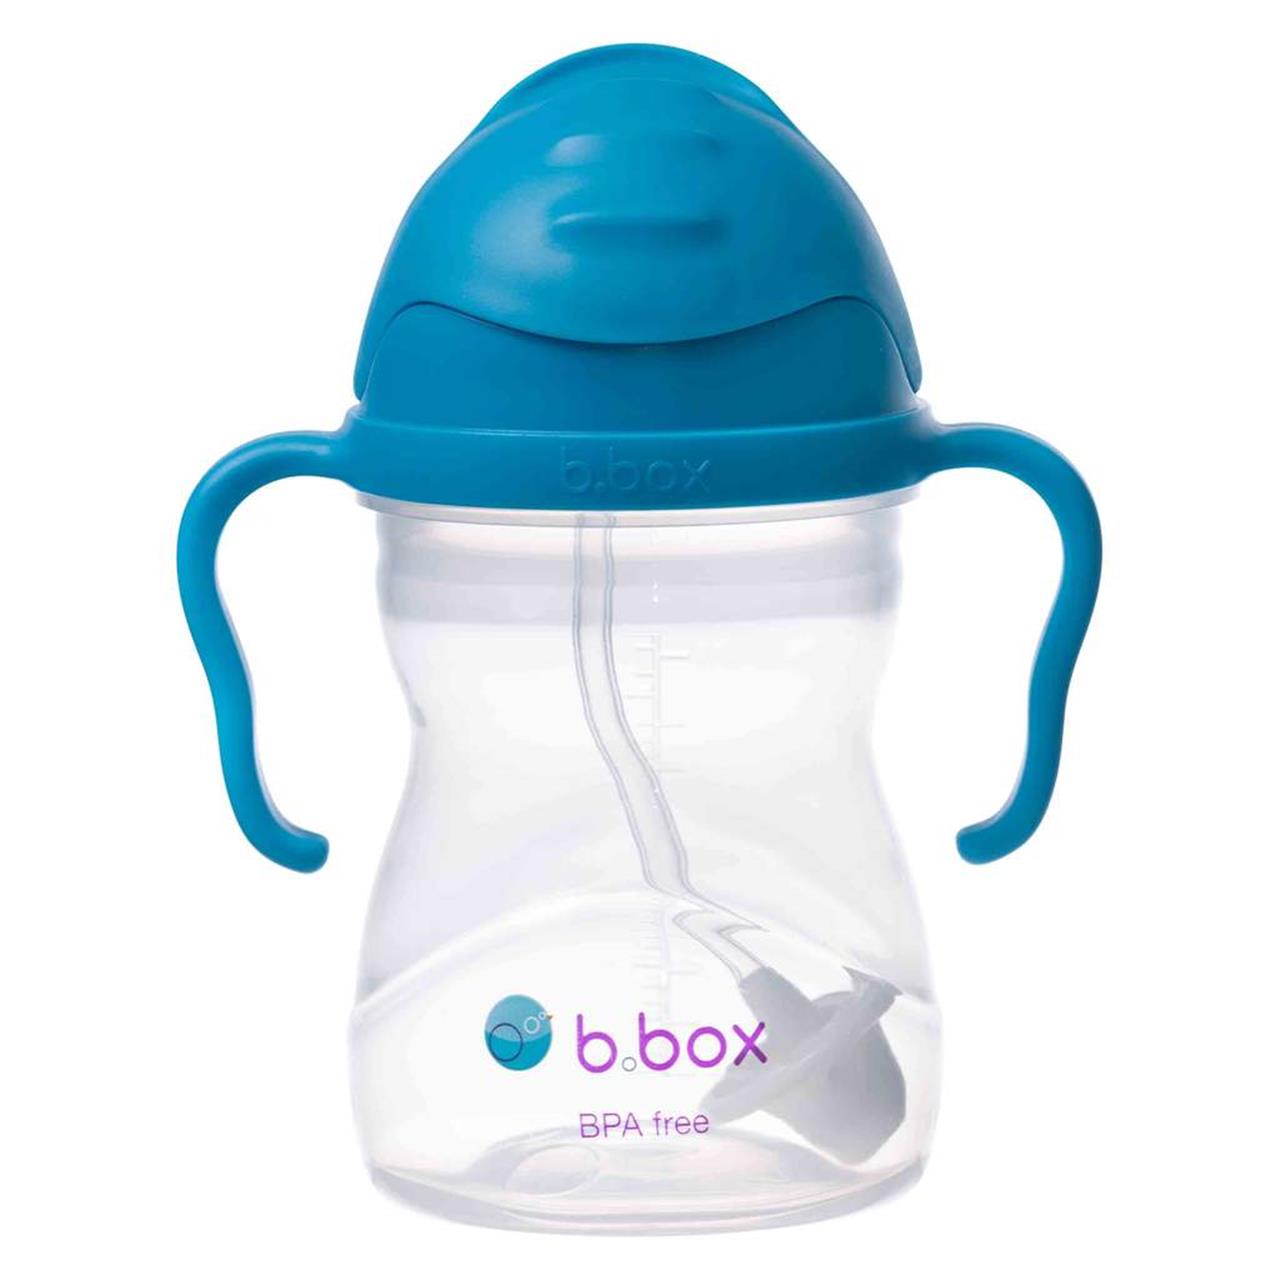 b.box Sippy Cup in Neon Cobalt Blue available at Bear & Moo